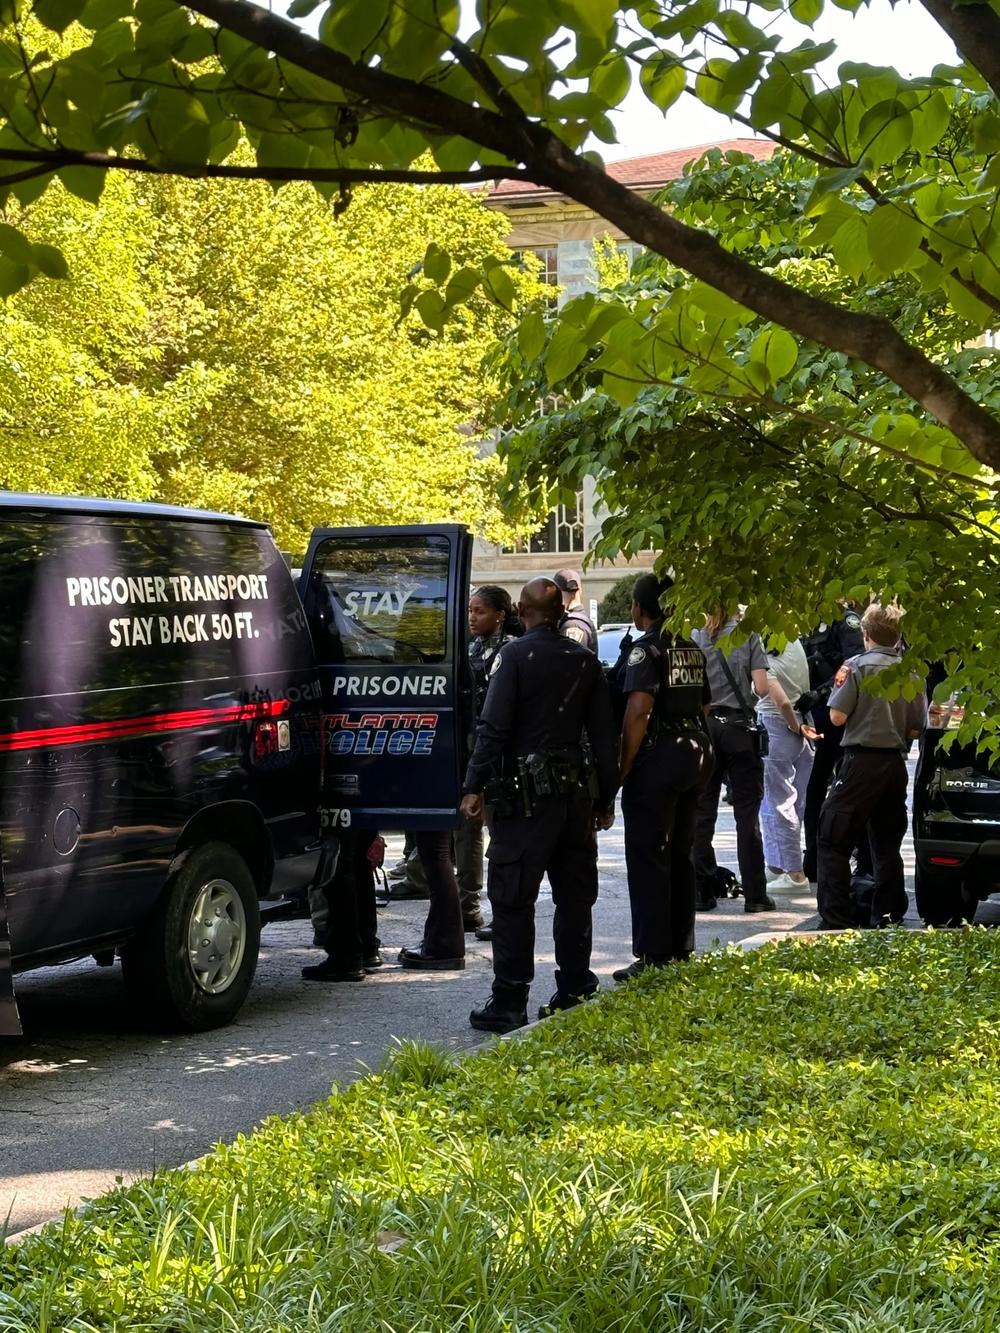 Atlanta Police load arrested protesters into the back of a van at Emory University.